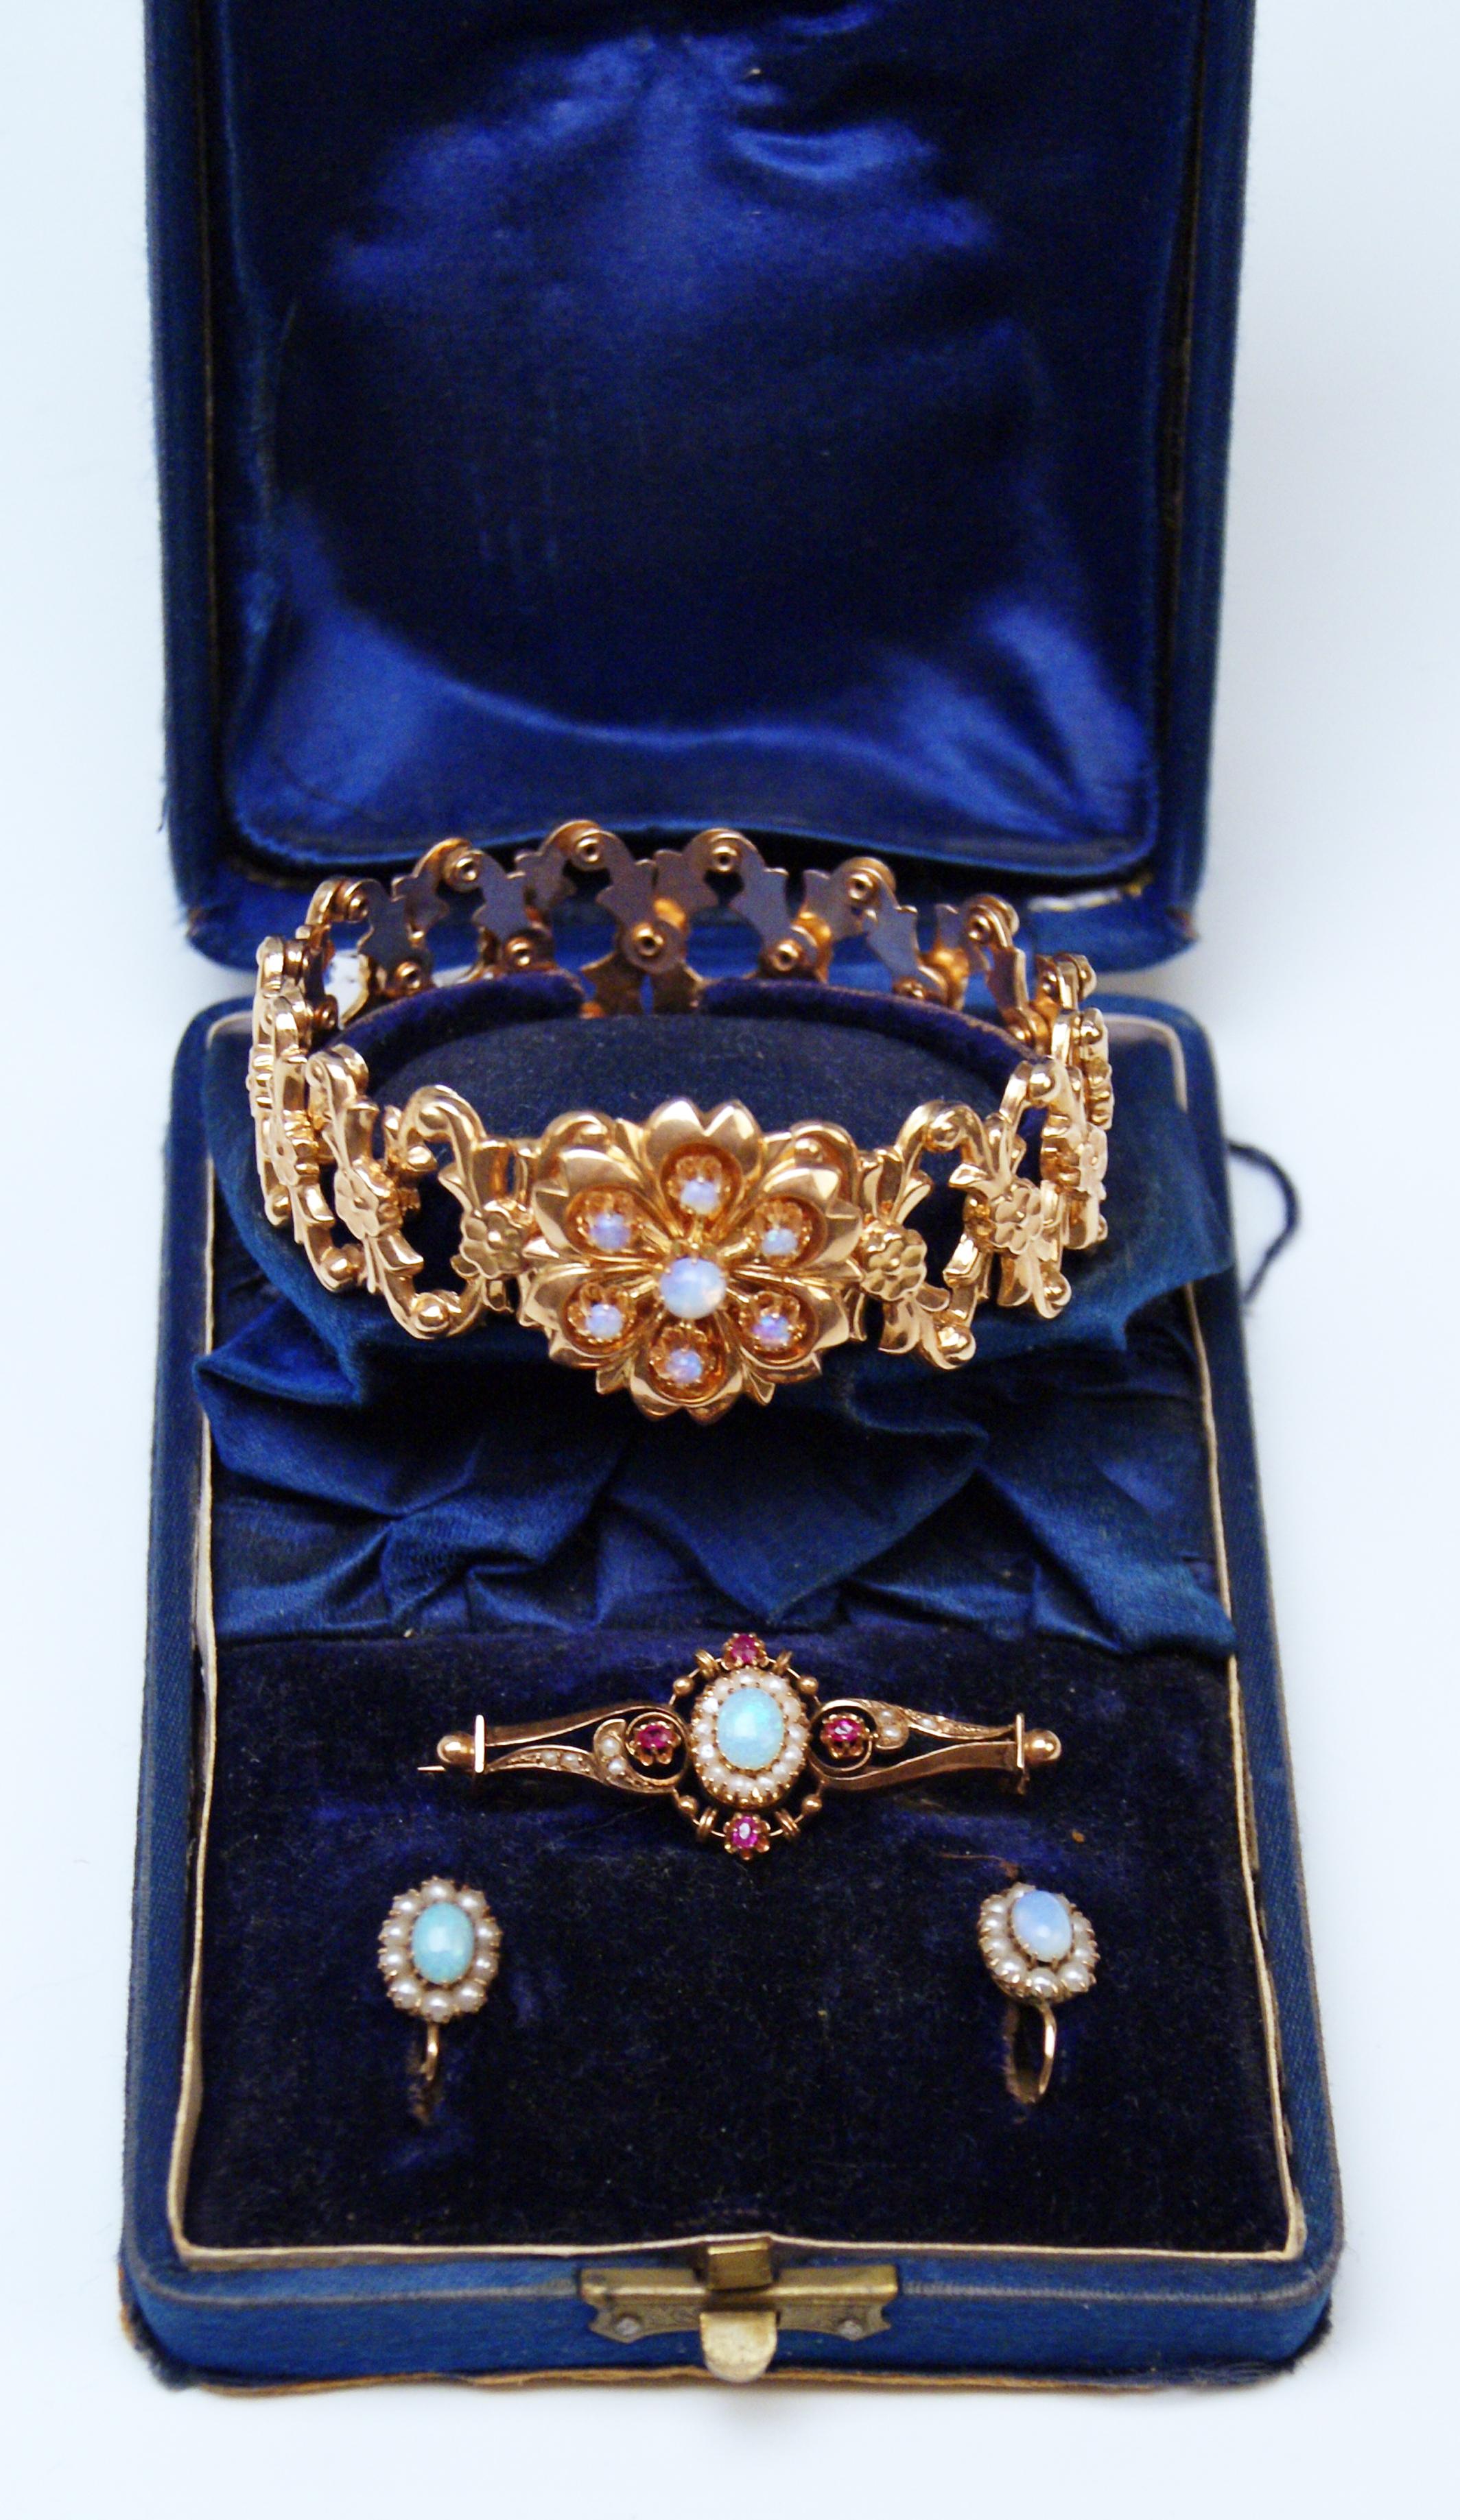 High Victorian Bracelet Brooch Earrings Set Gold 585 Opals Freshwater Pearls Rubies, circa 1880 For Sale